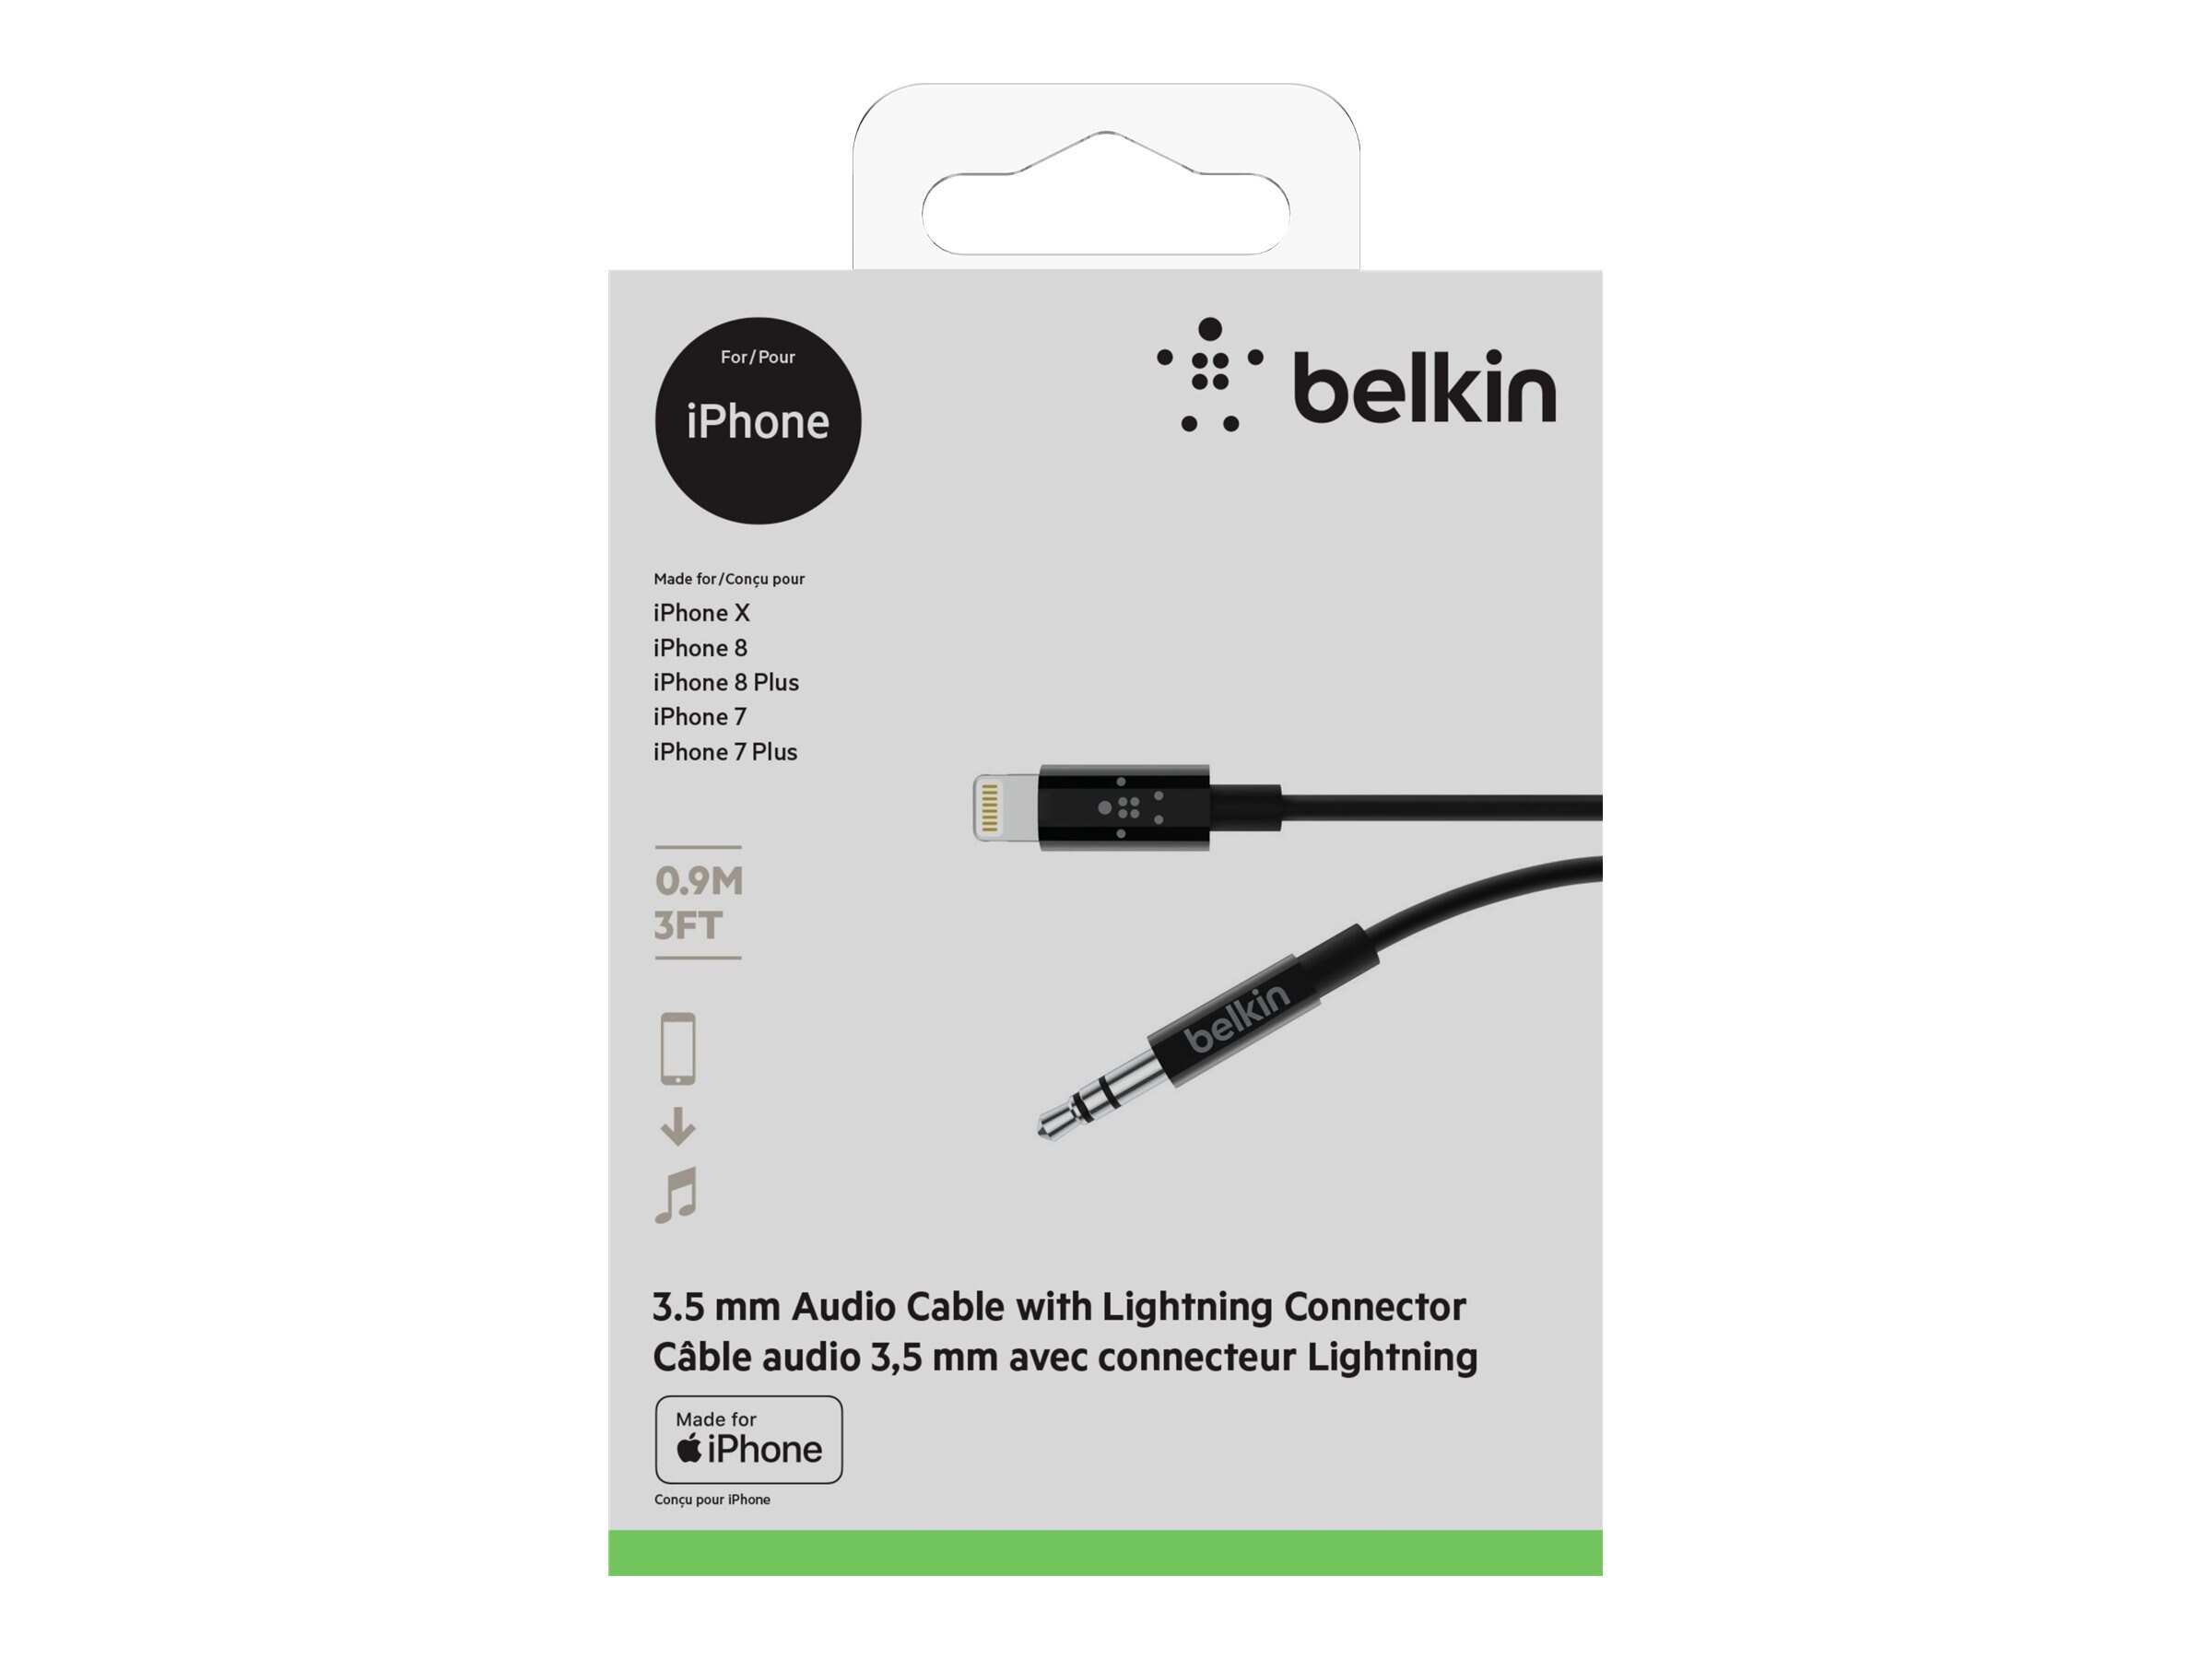 Belkin 3.5 mm Audio Cable with Lightning Connector, Black